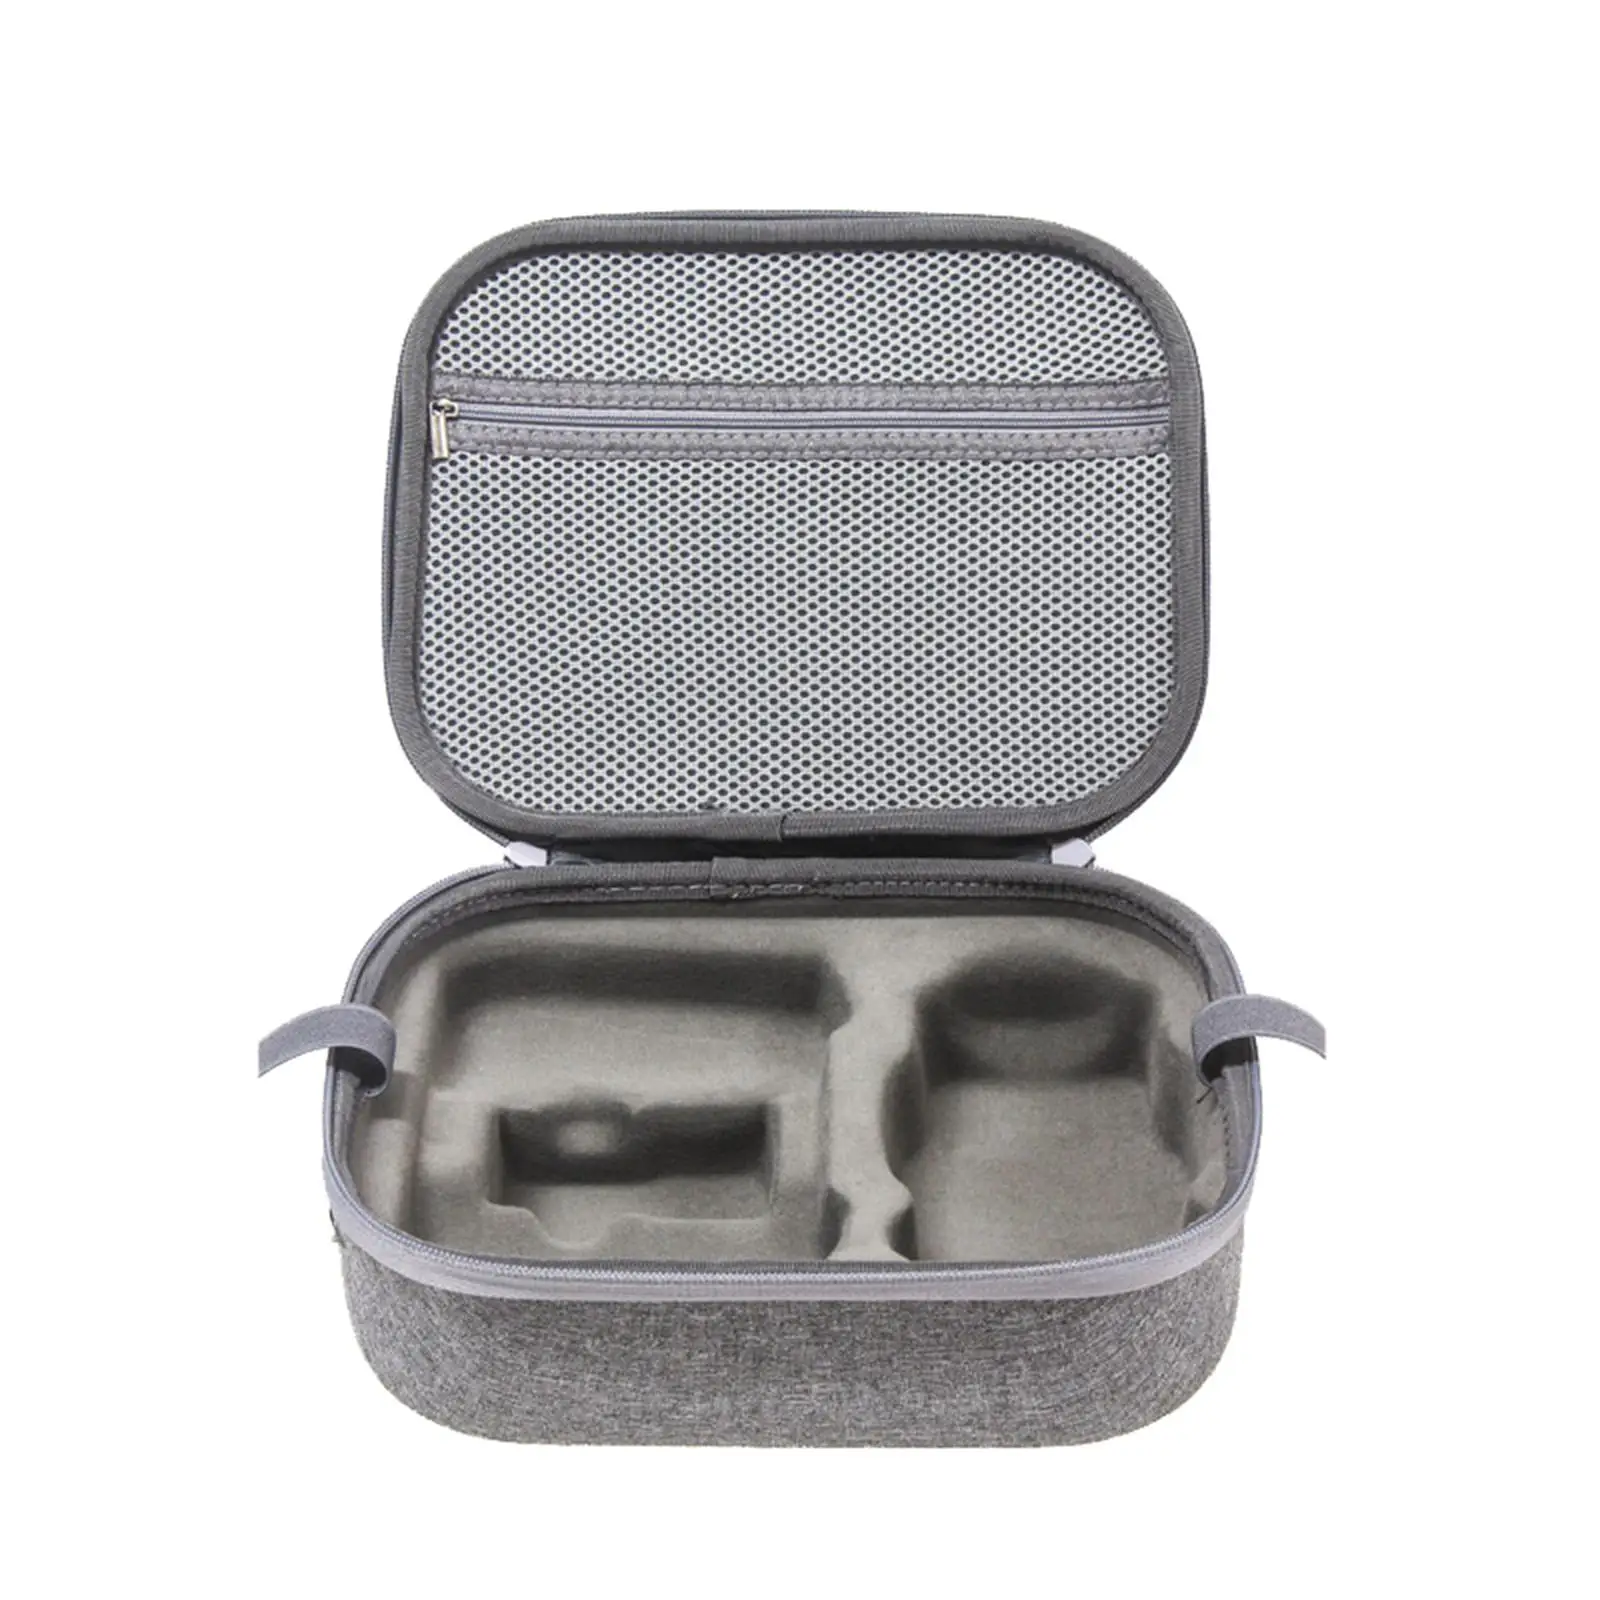 Waterproof Carrying Case Protection Hard Surface EVA Suitcase Storage Tote for Quadcopter Remote Controller Battery Accessories